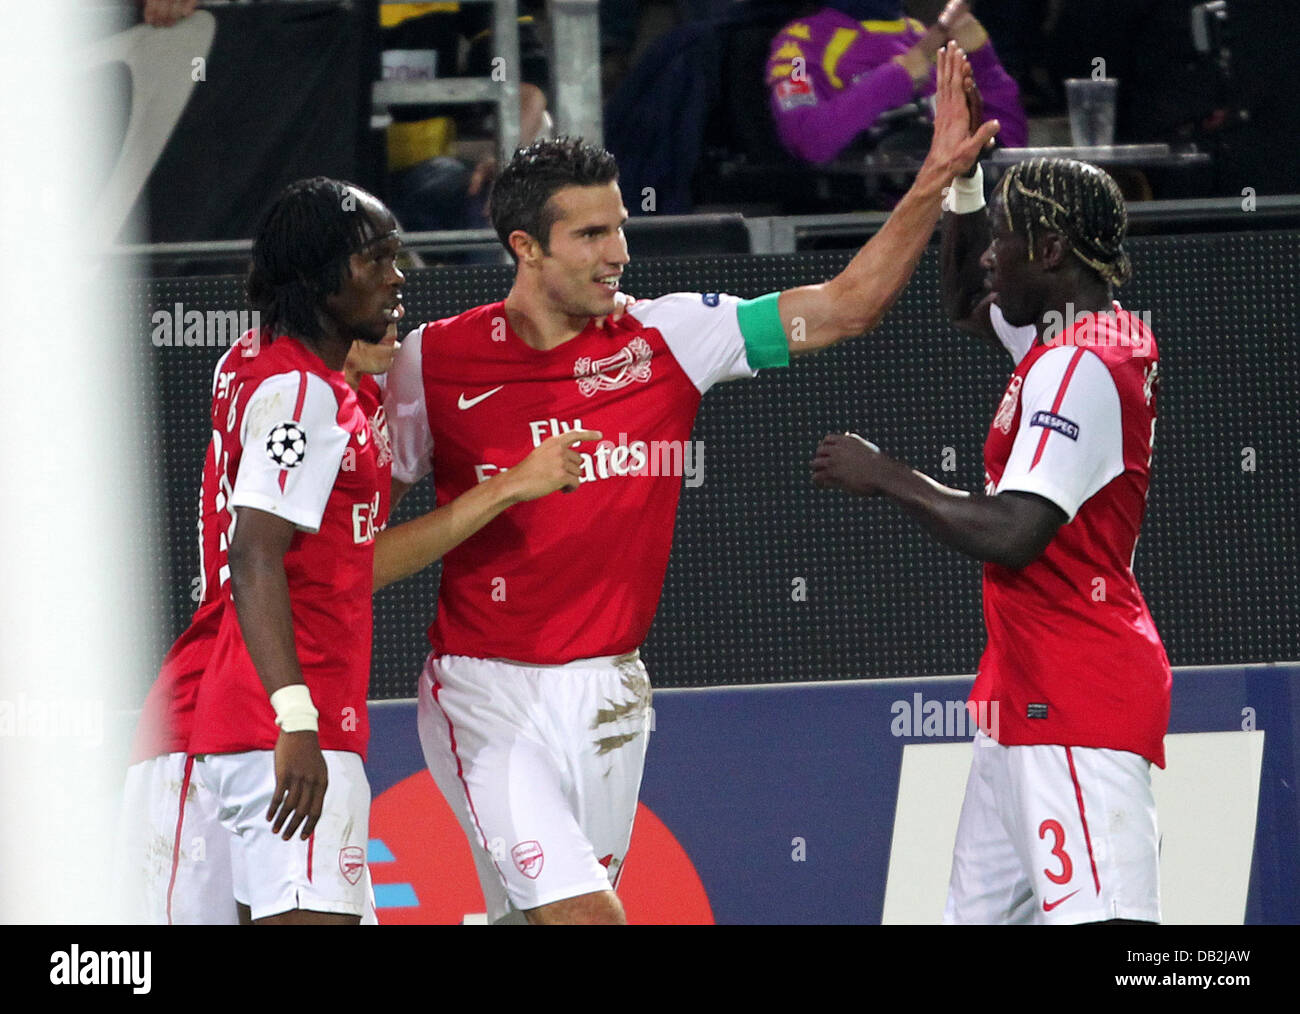 Robin van Persie (C) of Arsenal celebrates 0-1 goal with Bacary Sagna (r) and Gervinho during the Champions League group F soccer match between Borussia Dortmund and Arsenal FC at Signal-Iduna-Park stadium in Dortmund, Germany, 13 September 2011. Photo: Roland Weihrauch dpa/lnw  +++(c) dpa - Bildfunk+++ Stock Photo